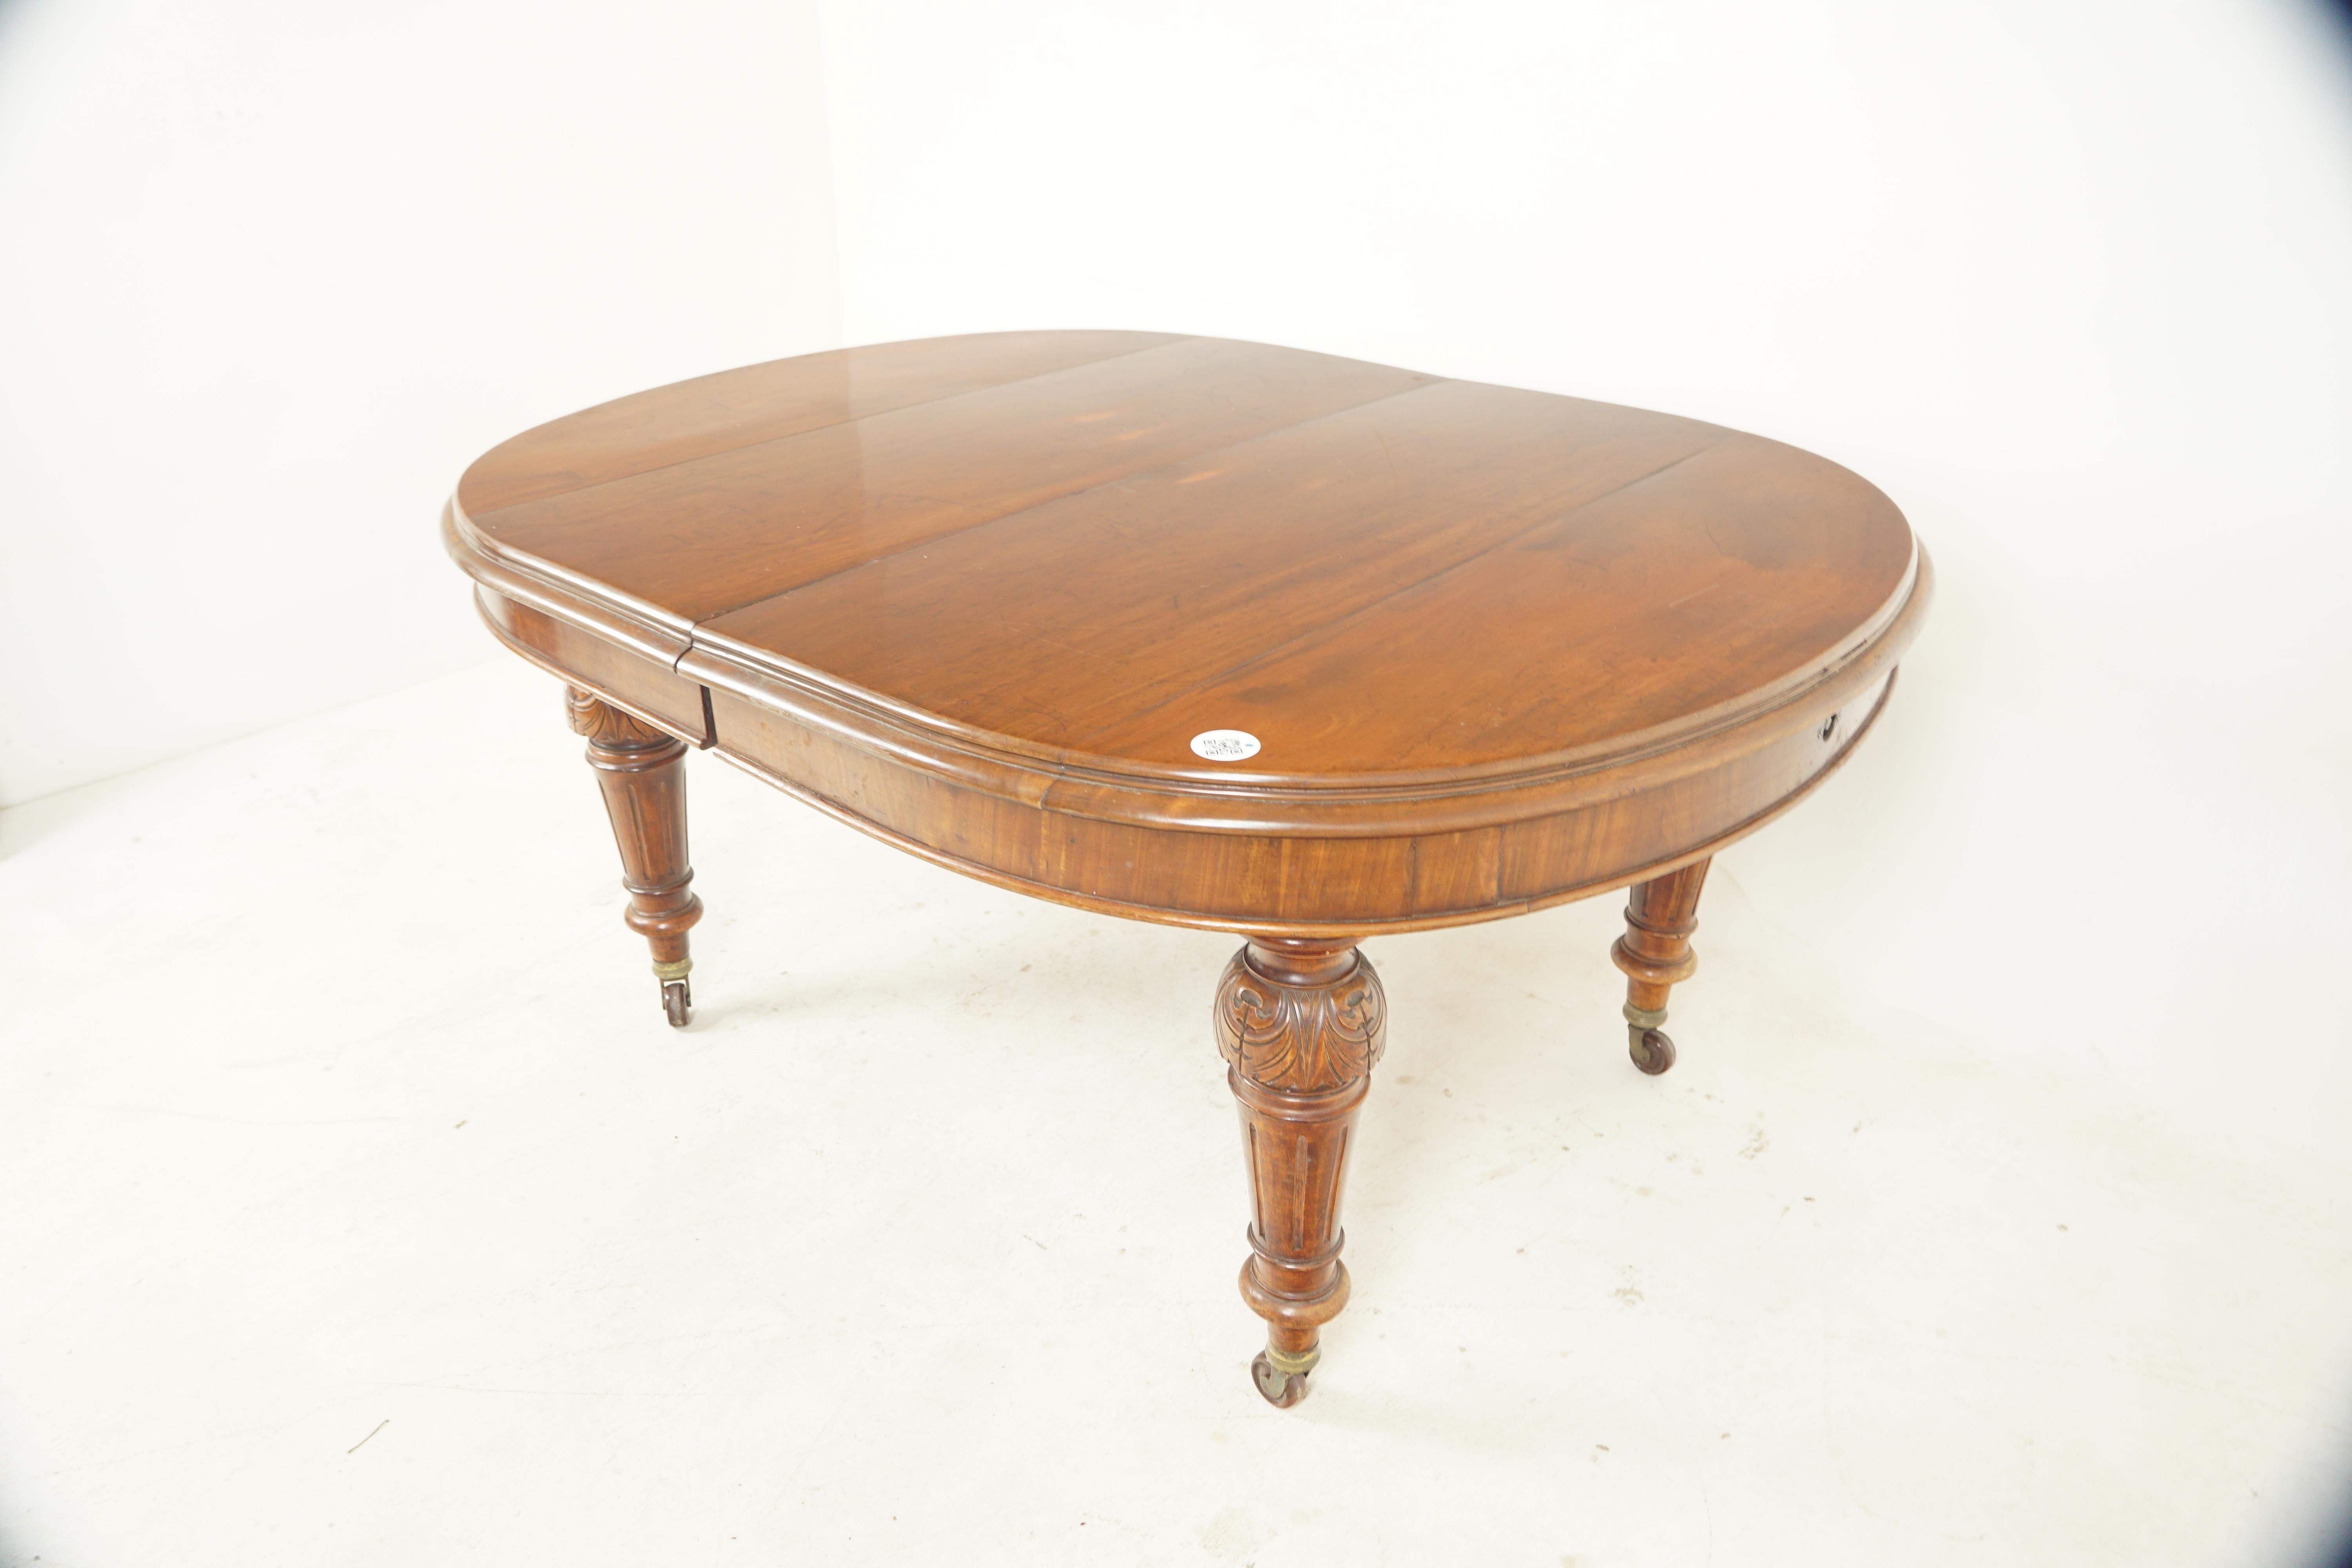 Antique Victorian walnut 2 leaf circular extending dining table, Scotland 1880, H648

Scotland 1880
Solid walnut
Original finish
Beautiful walnut top with a moulded edge
All supported by carved turned legs
With original castors